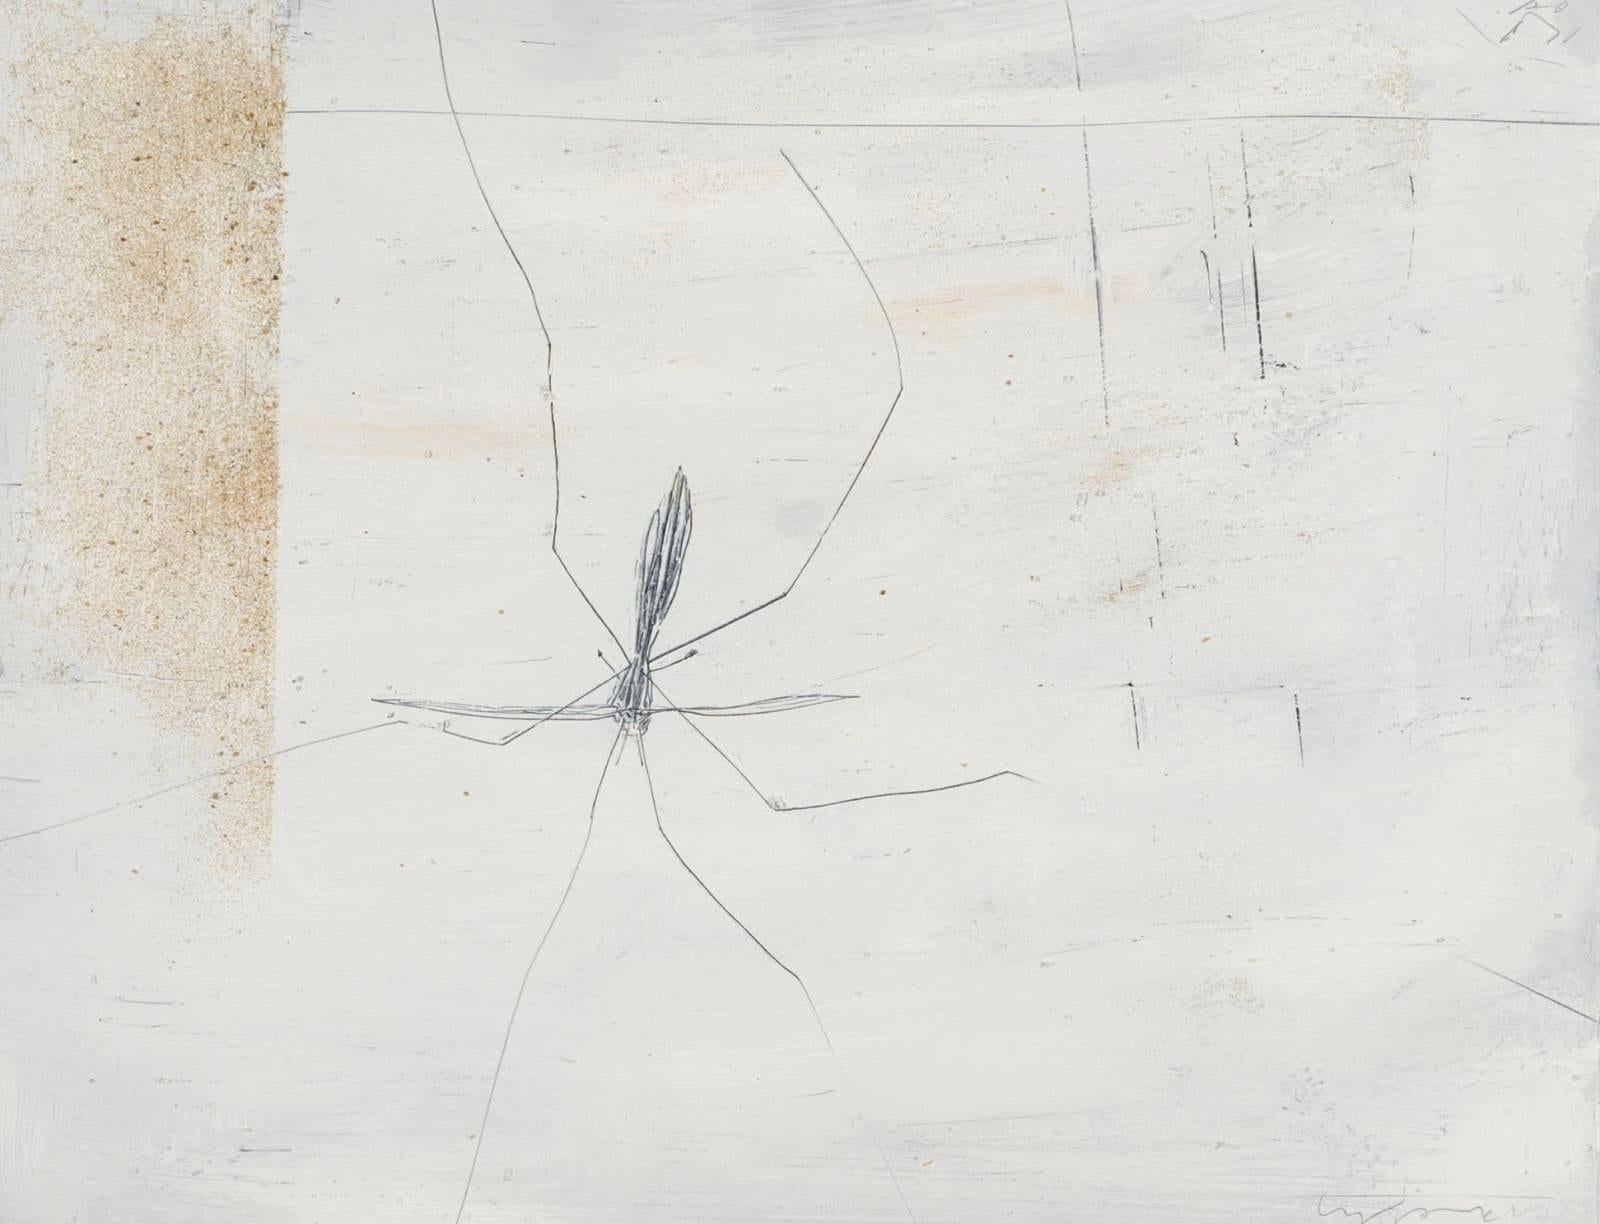 Oil and Pencil on Board 'Cranefly' Painting by Keith Purser B. 1944

Additional information:
Medium: Oil and pencil on board
Dimensions: 13 x 17 1/2 in
33 x 44.5 cm

Keith Purser lives and works on the edge of the desert-like environment of Europe's